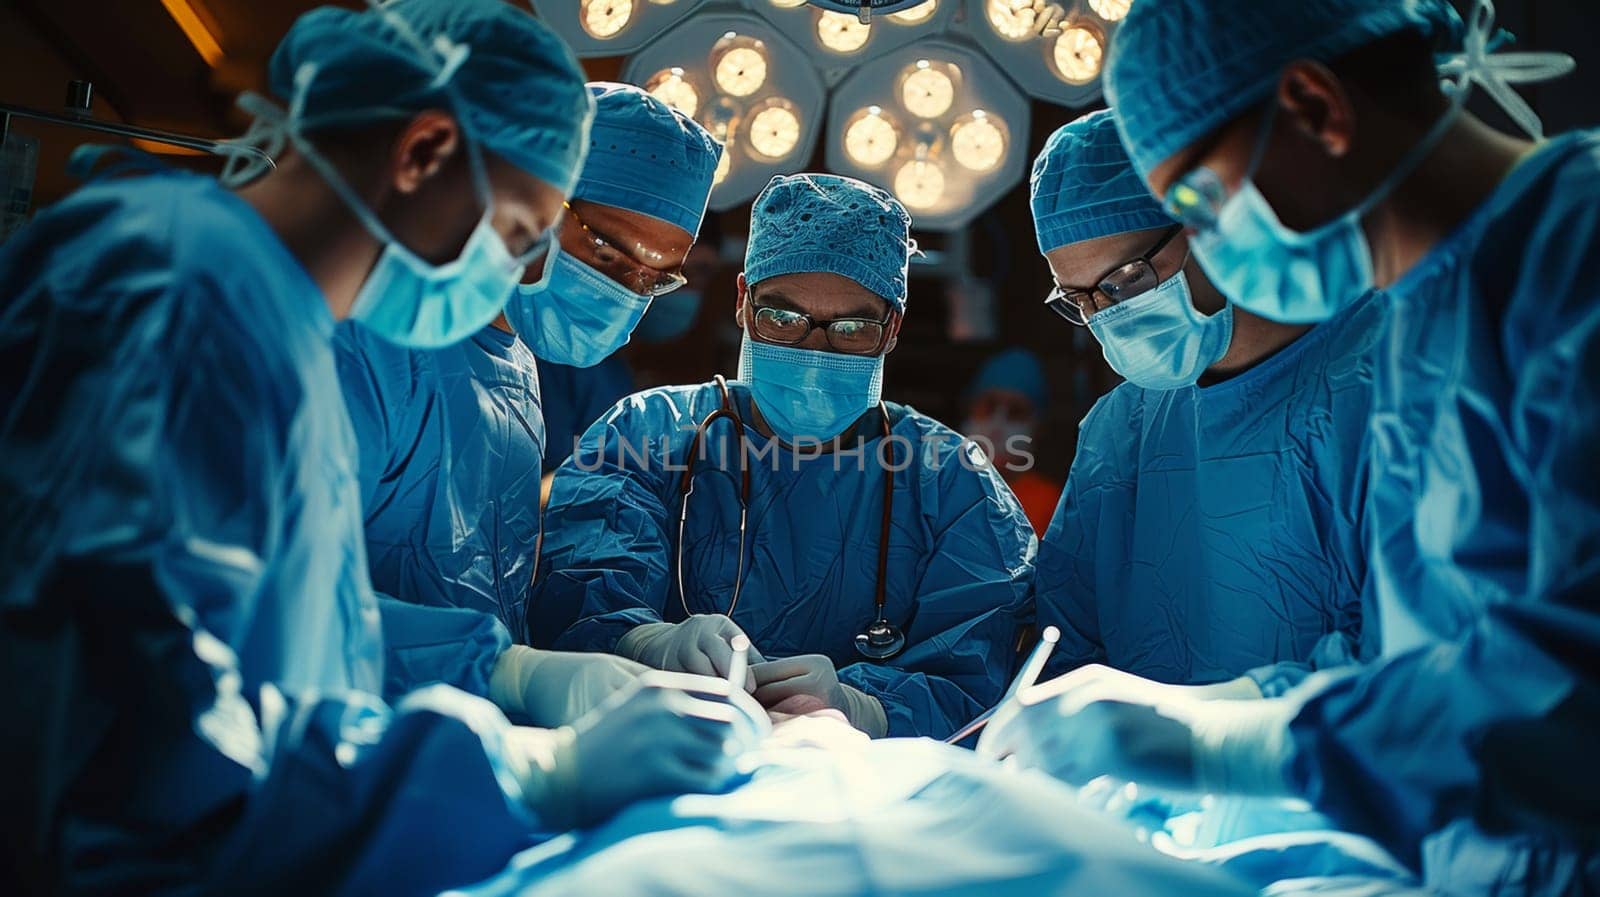 A group of surgeons are performing a surgery.